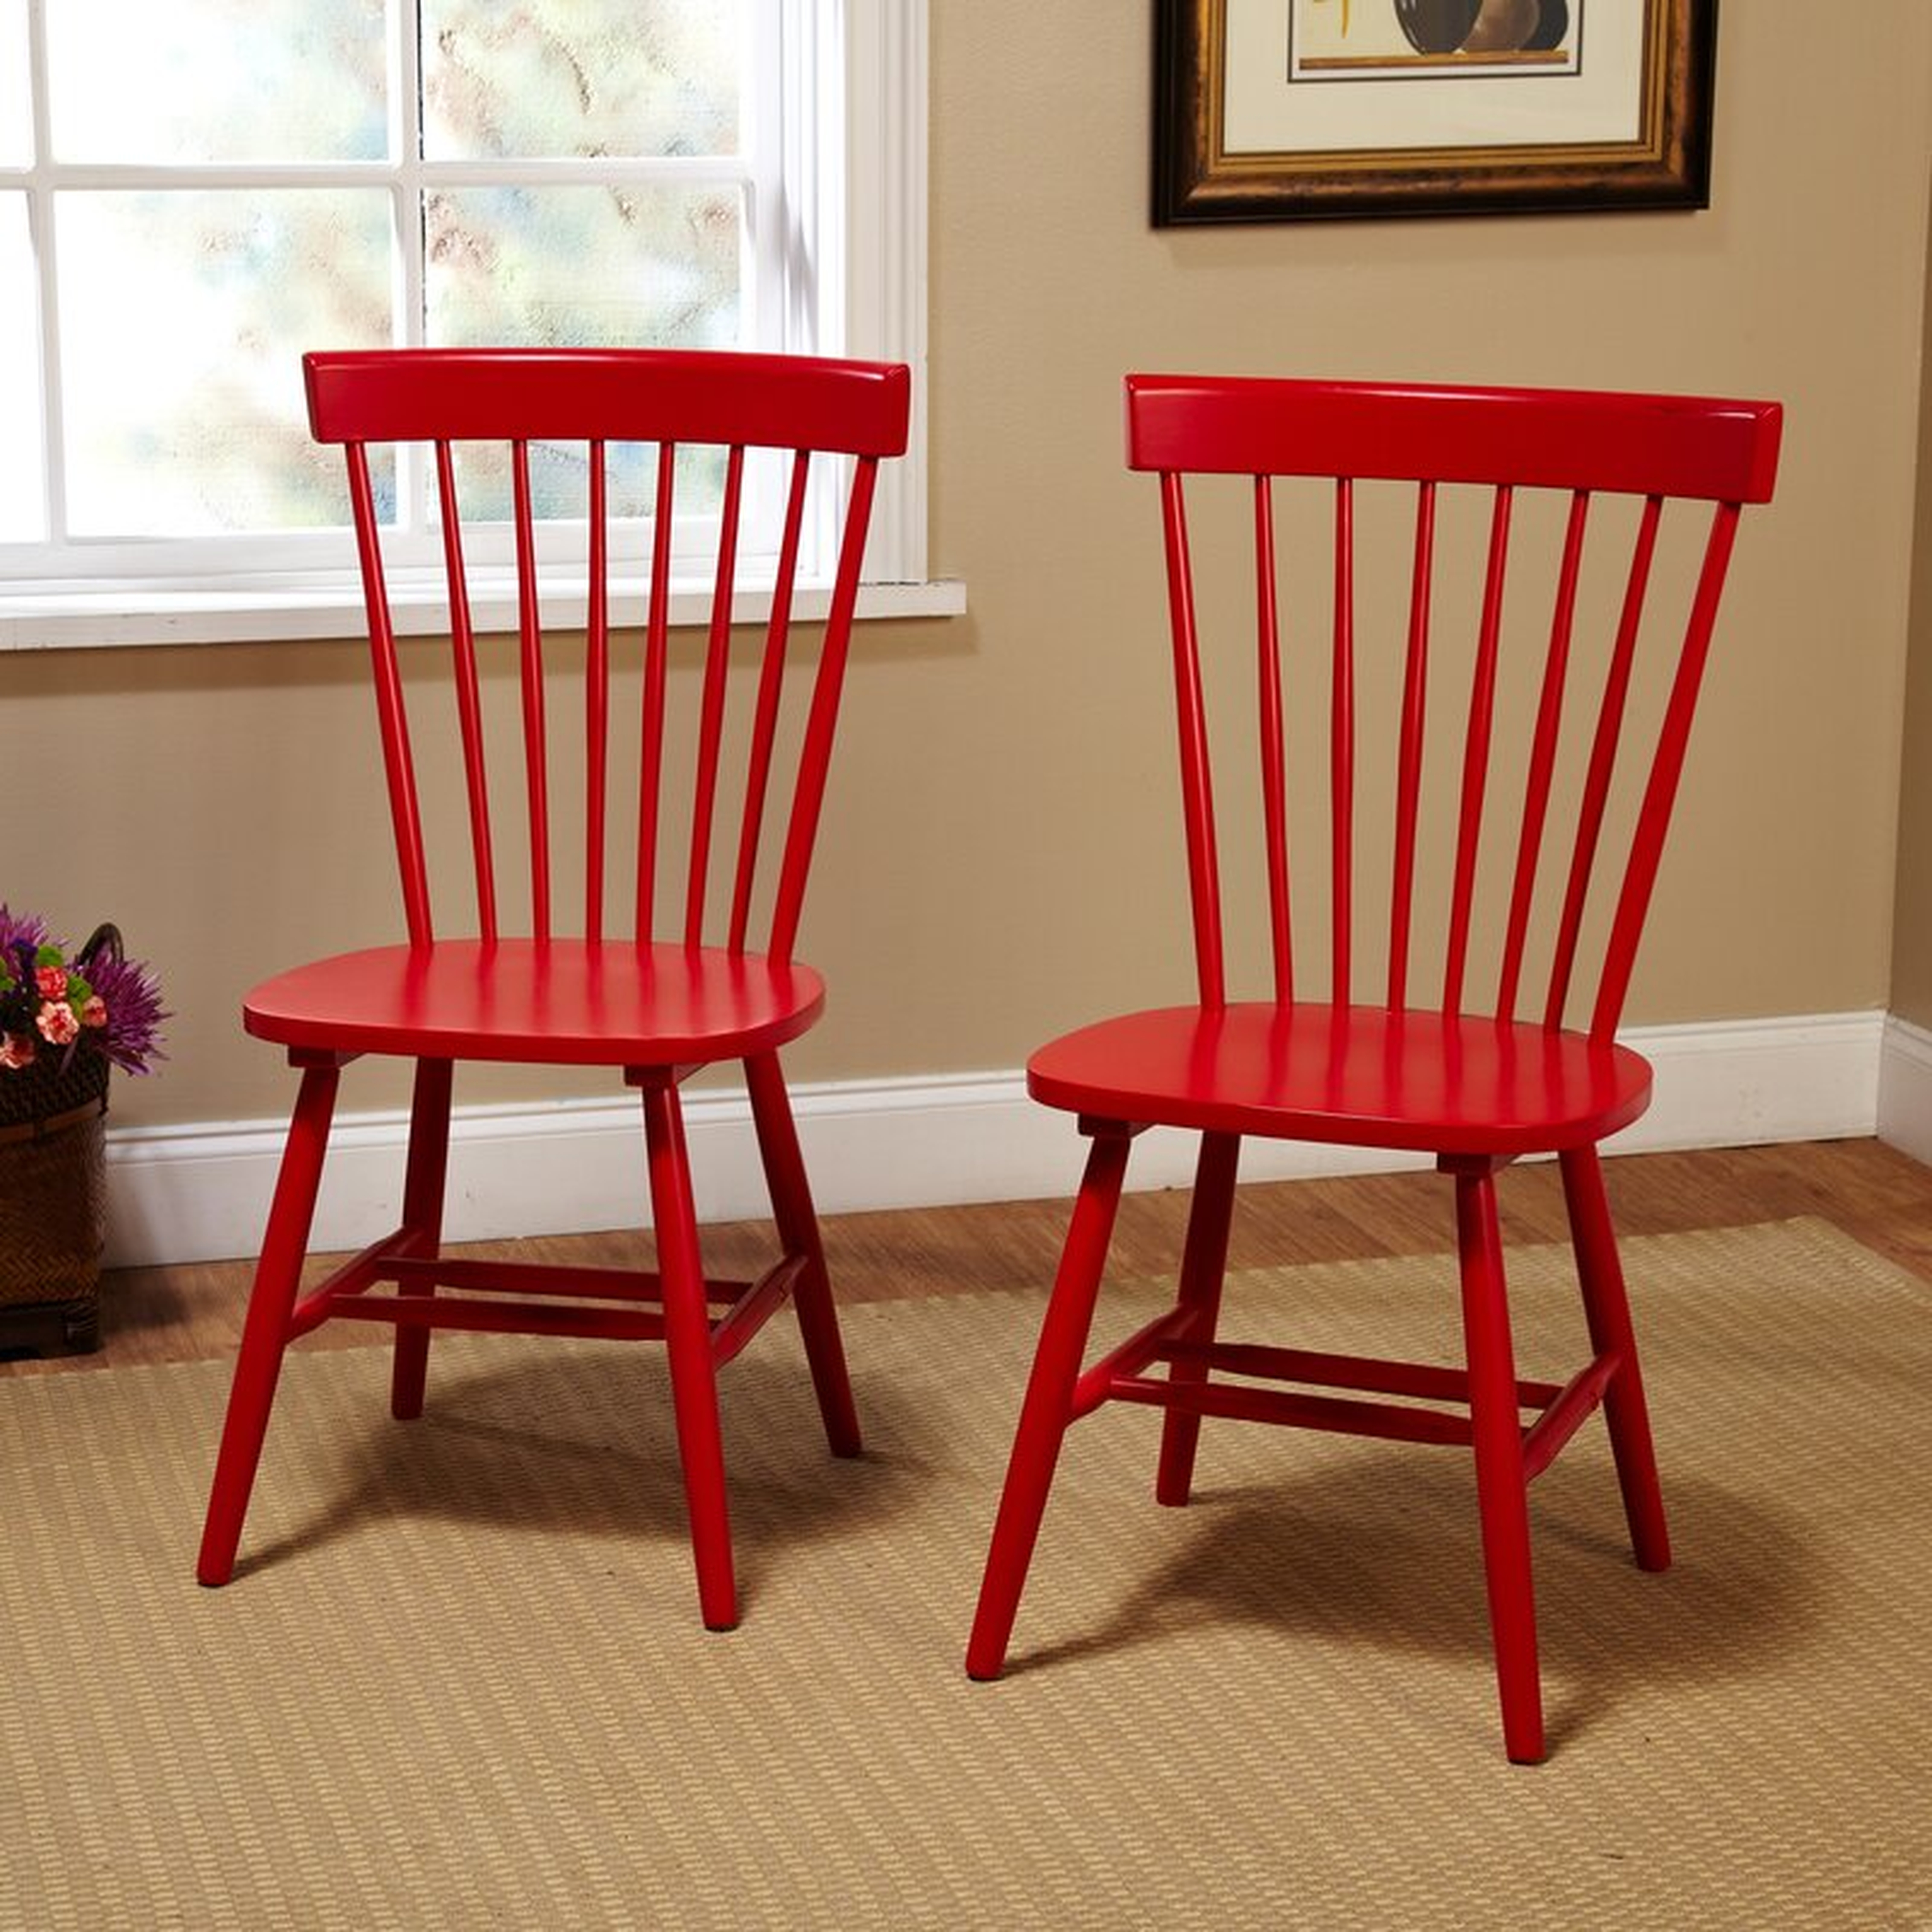 Roudebush Solid Wood Dining Chair / Set of 2 / Red - Birch Lane